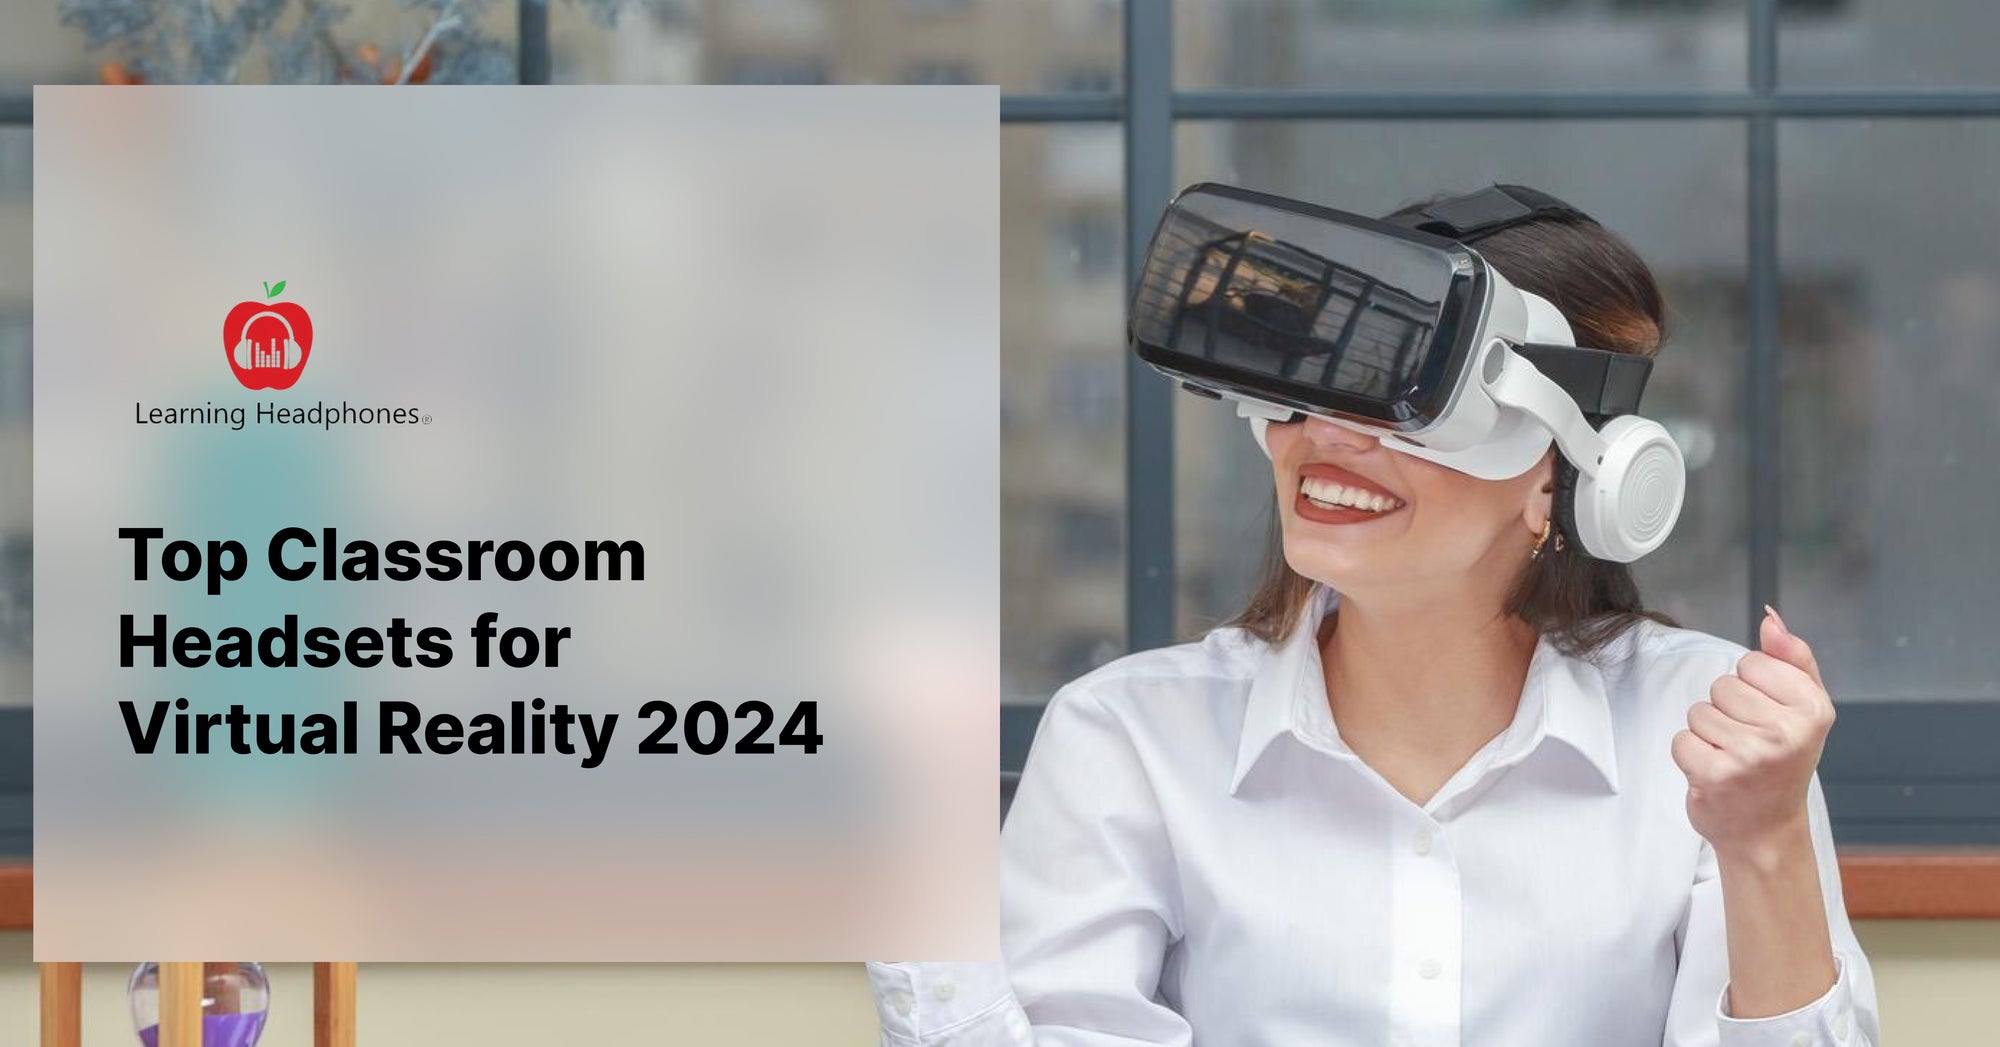  Top Classroom Headsets for Virtual Reality 2024 